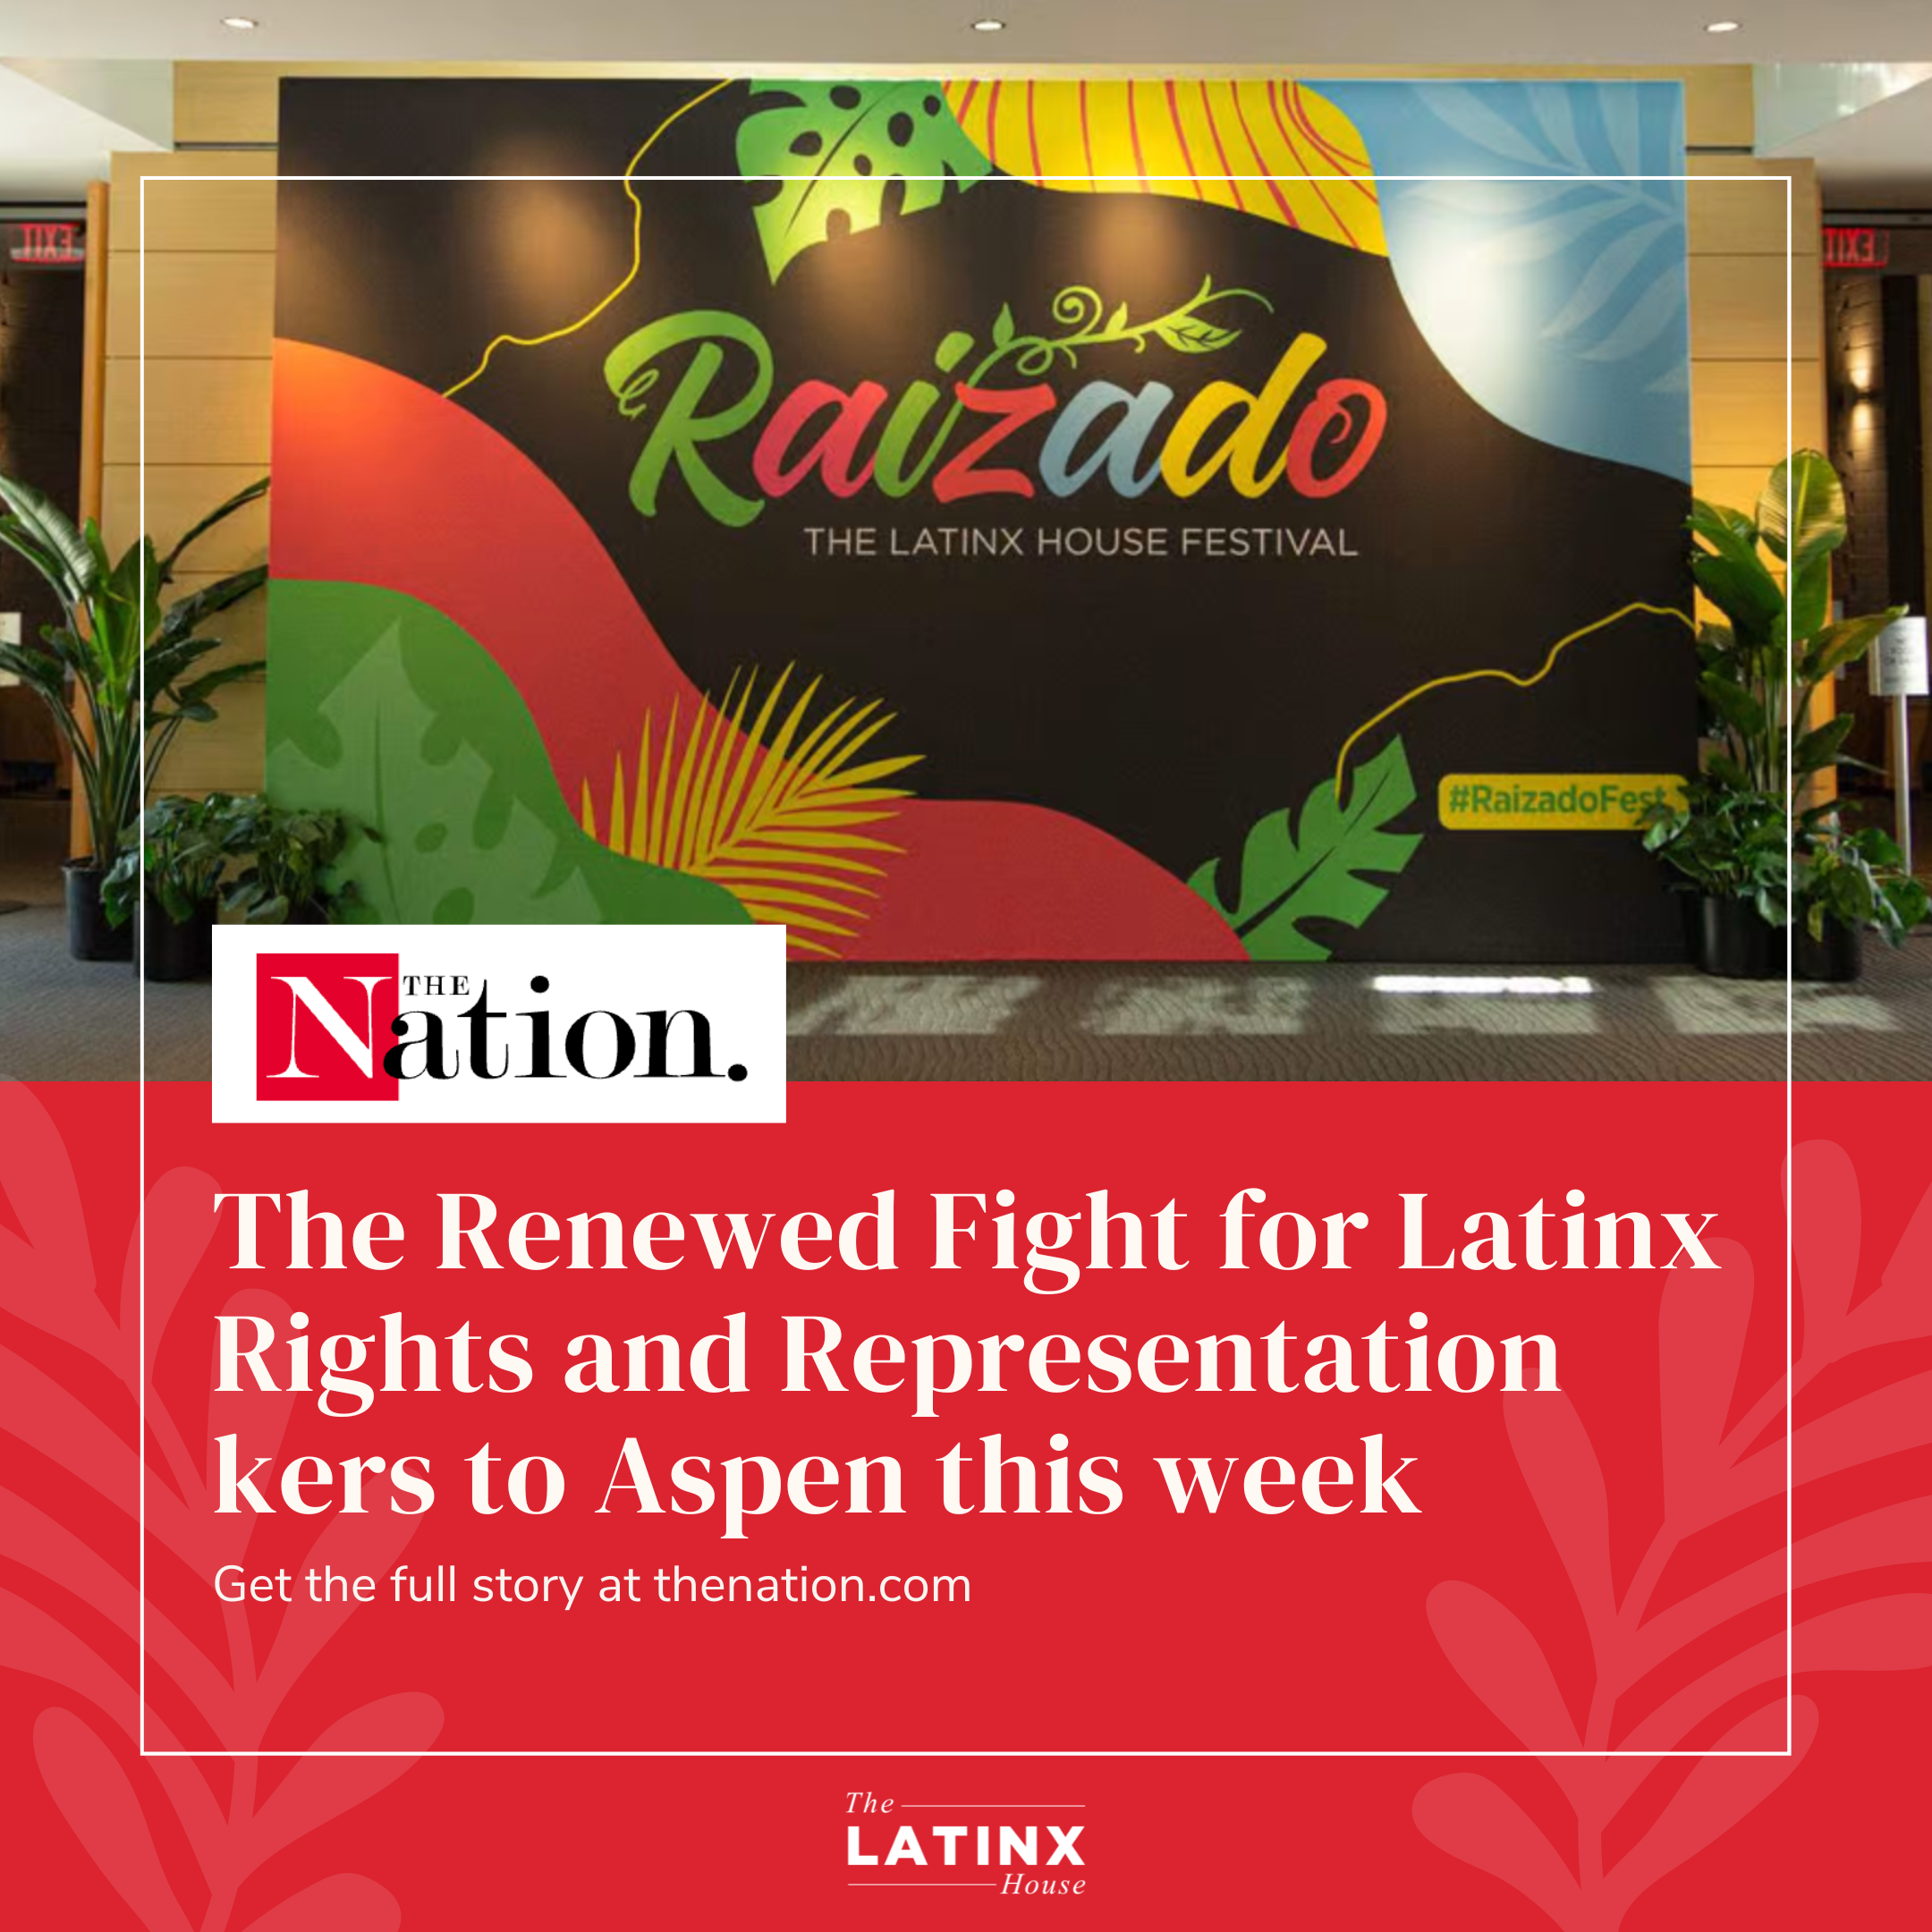 The Renewed Fight for Latinx Rights and Representation